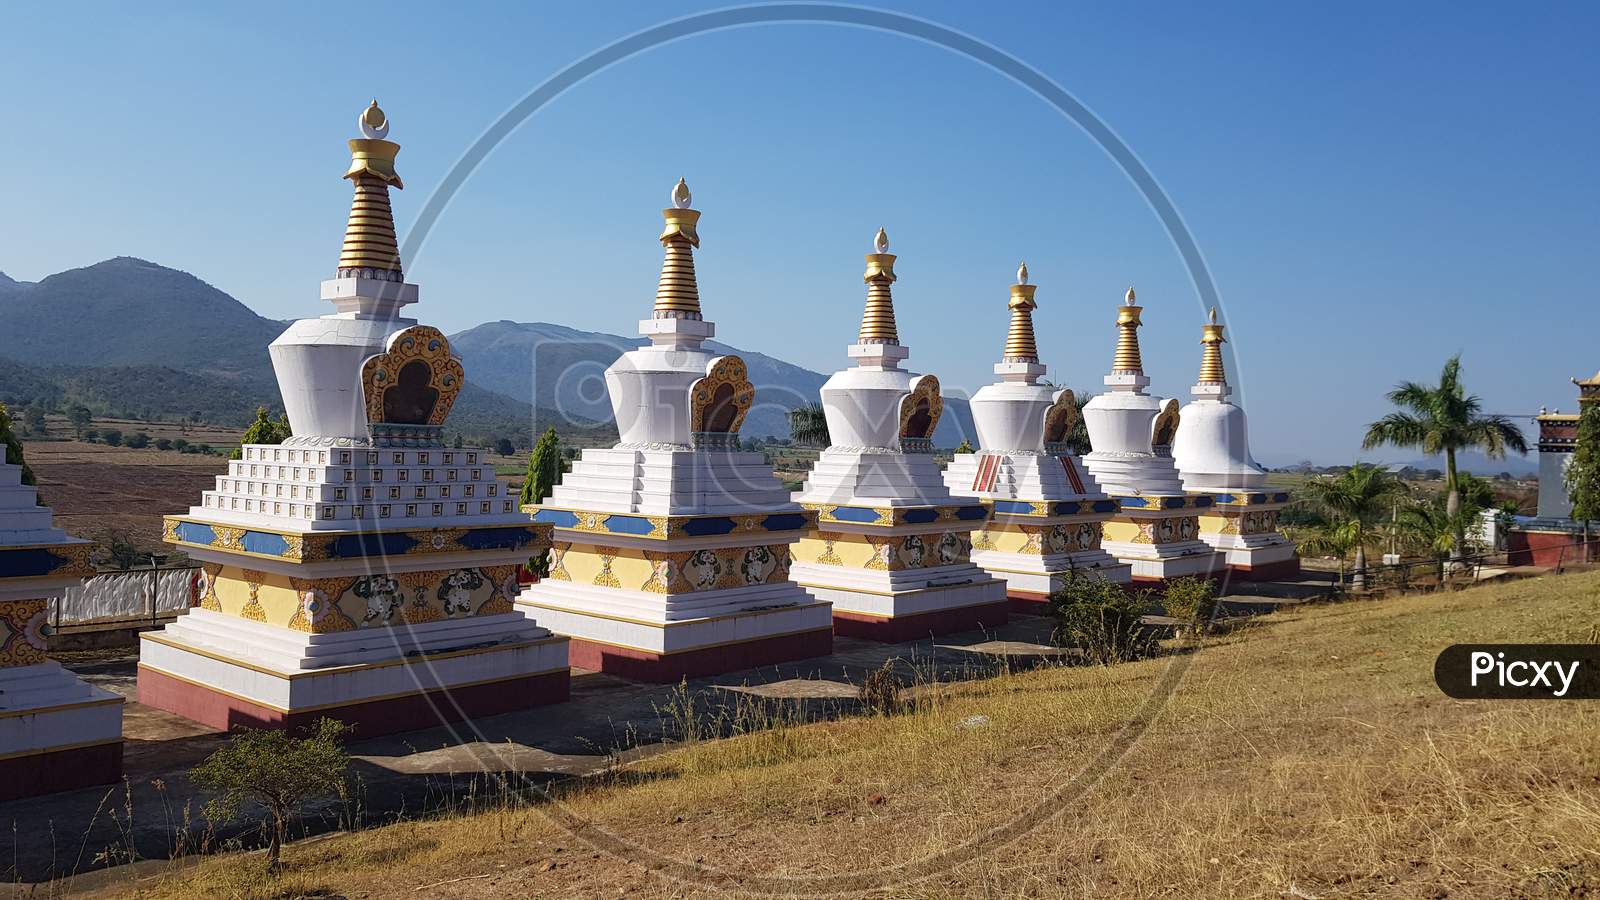 Kollegal, Karnataka / India - March 14 2020: Beautiful wide angle view of the Stupas at the Dhondenling monastery on a bright day with the mountains in the background